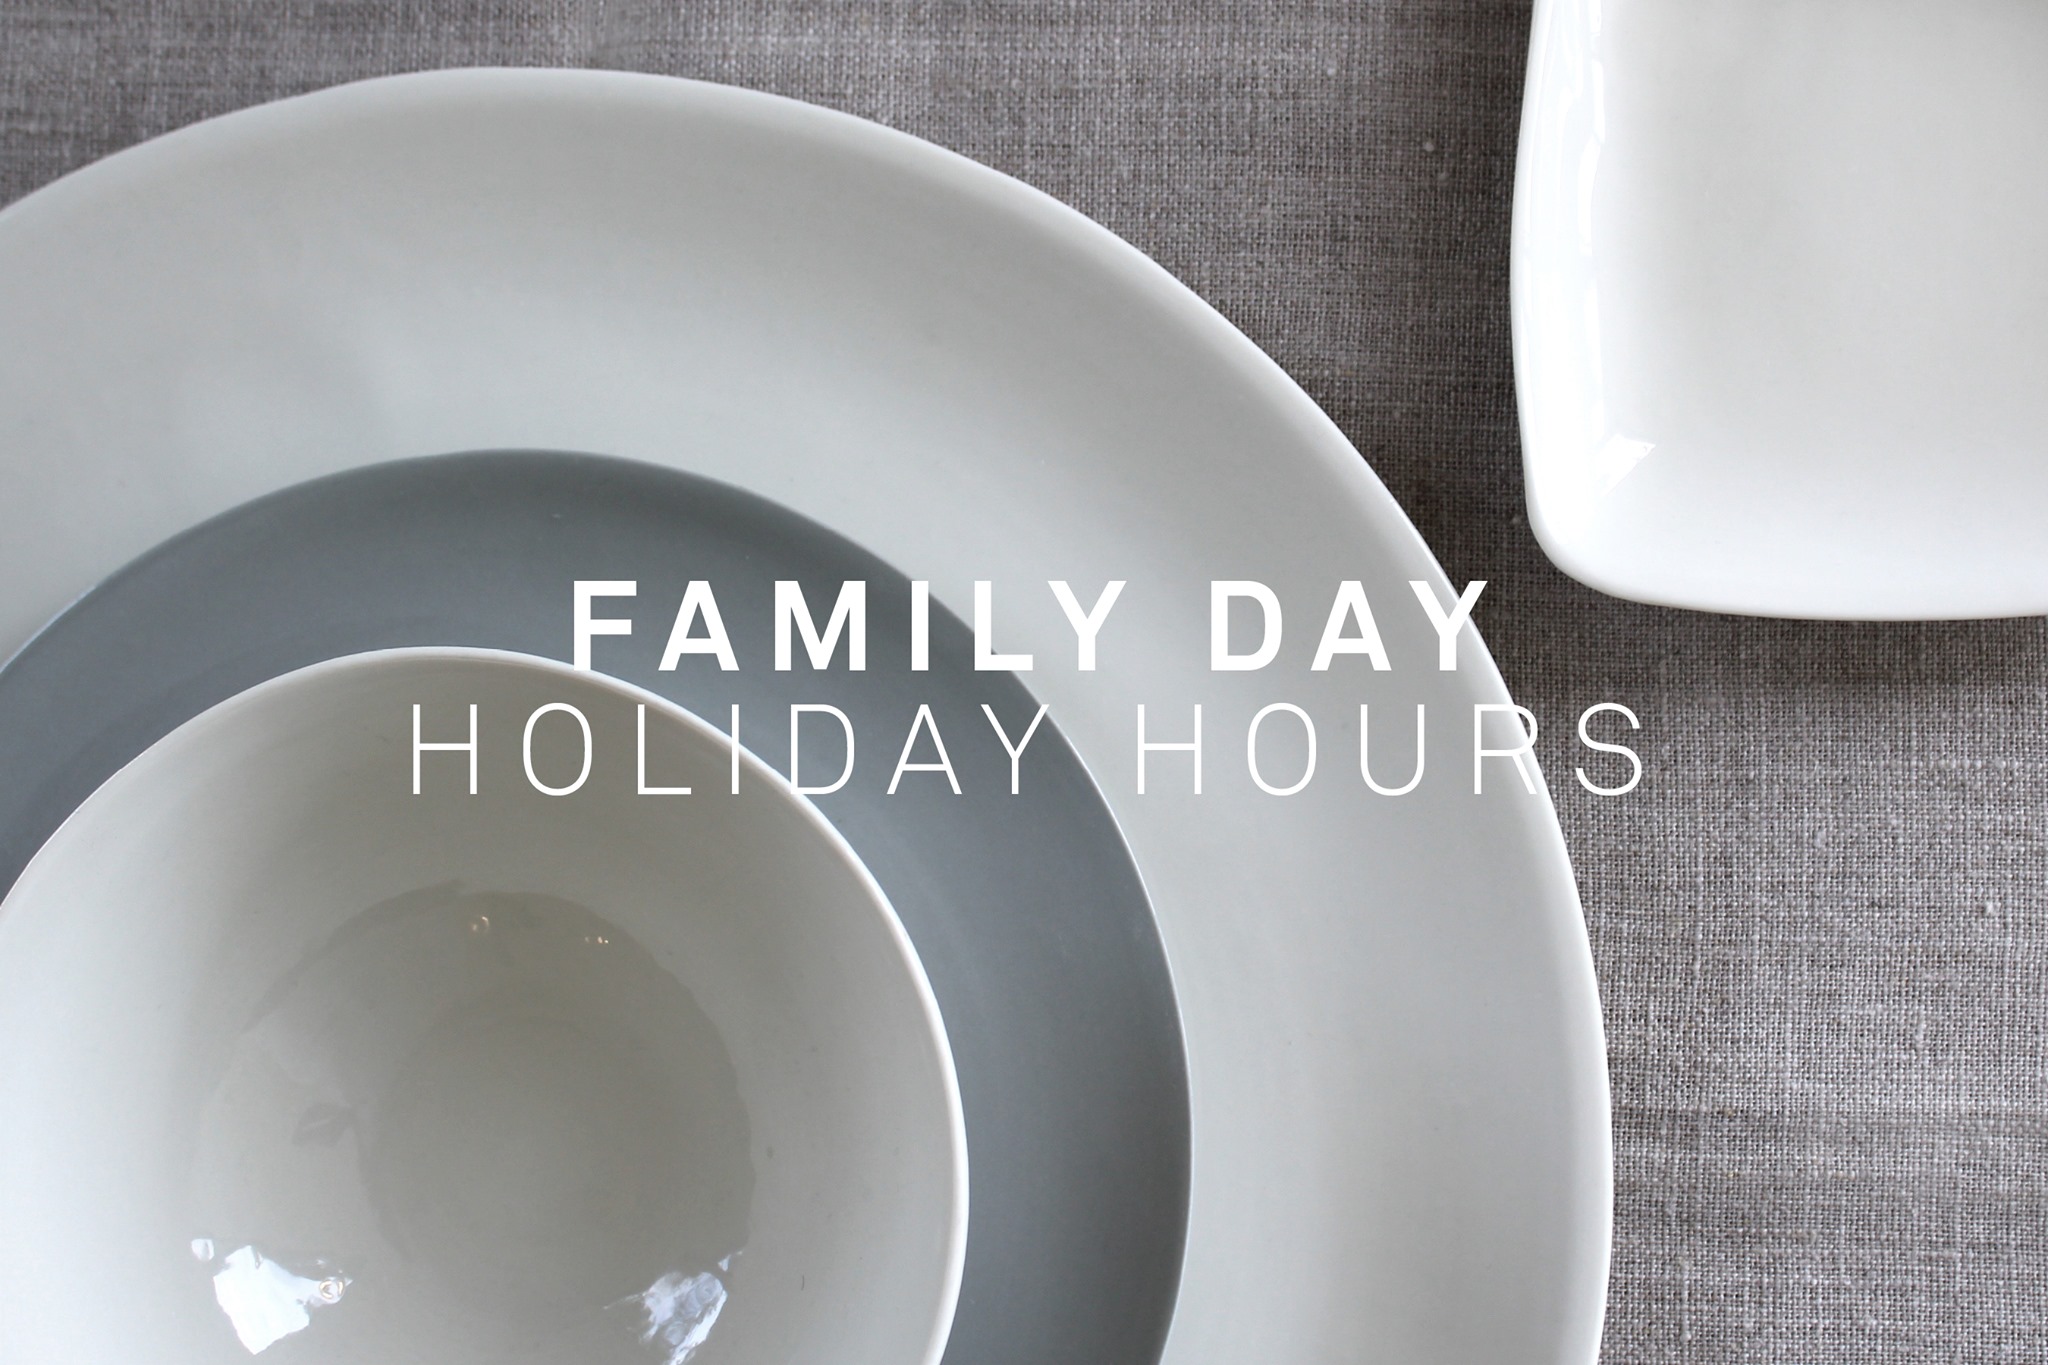 Family-day-hours